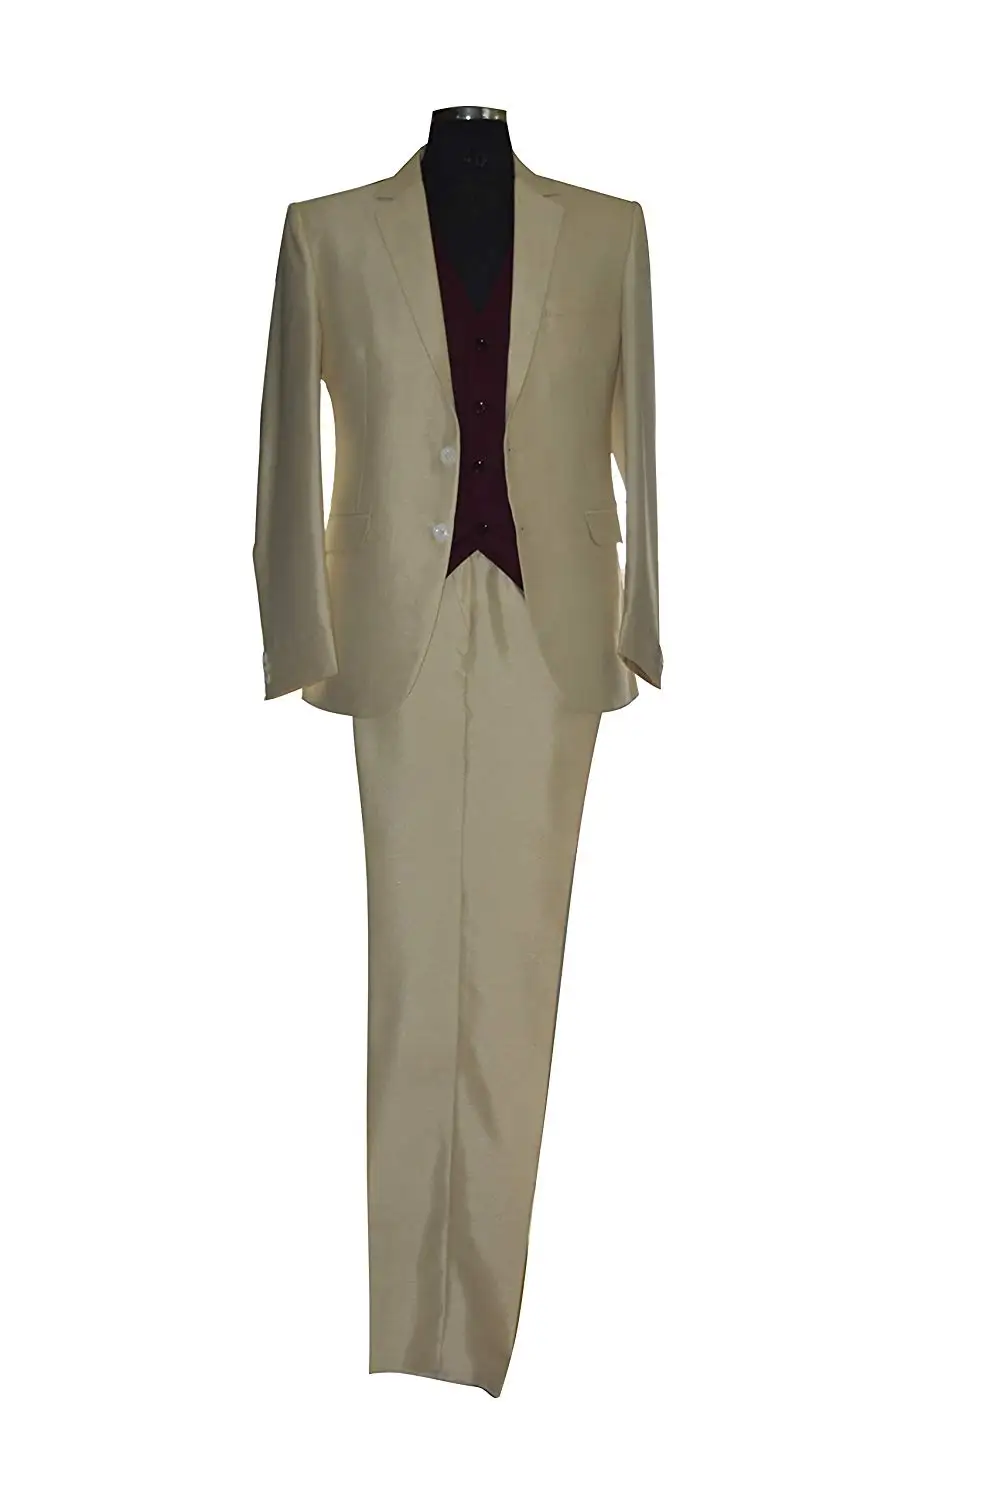 Cheap Trouser Suits For Women For Weddings Uk Find Trouser Suits